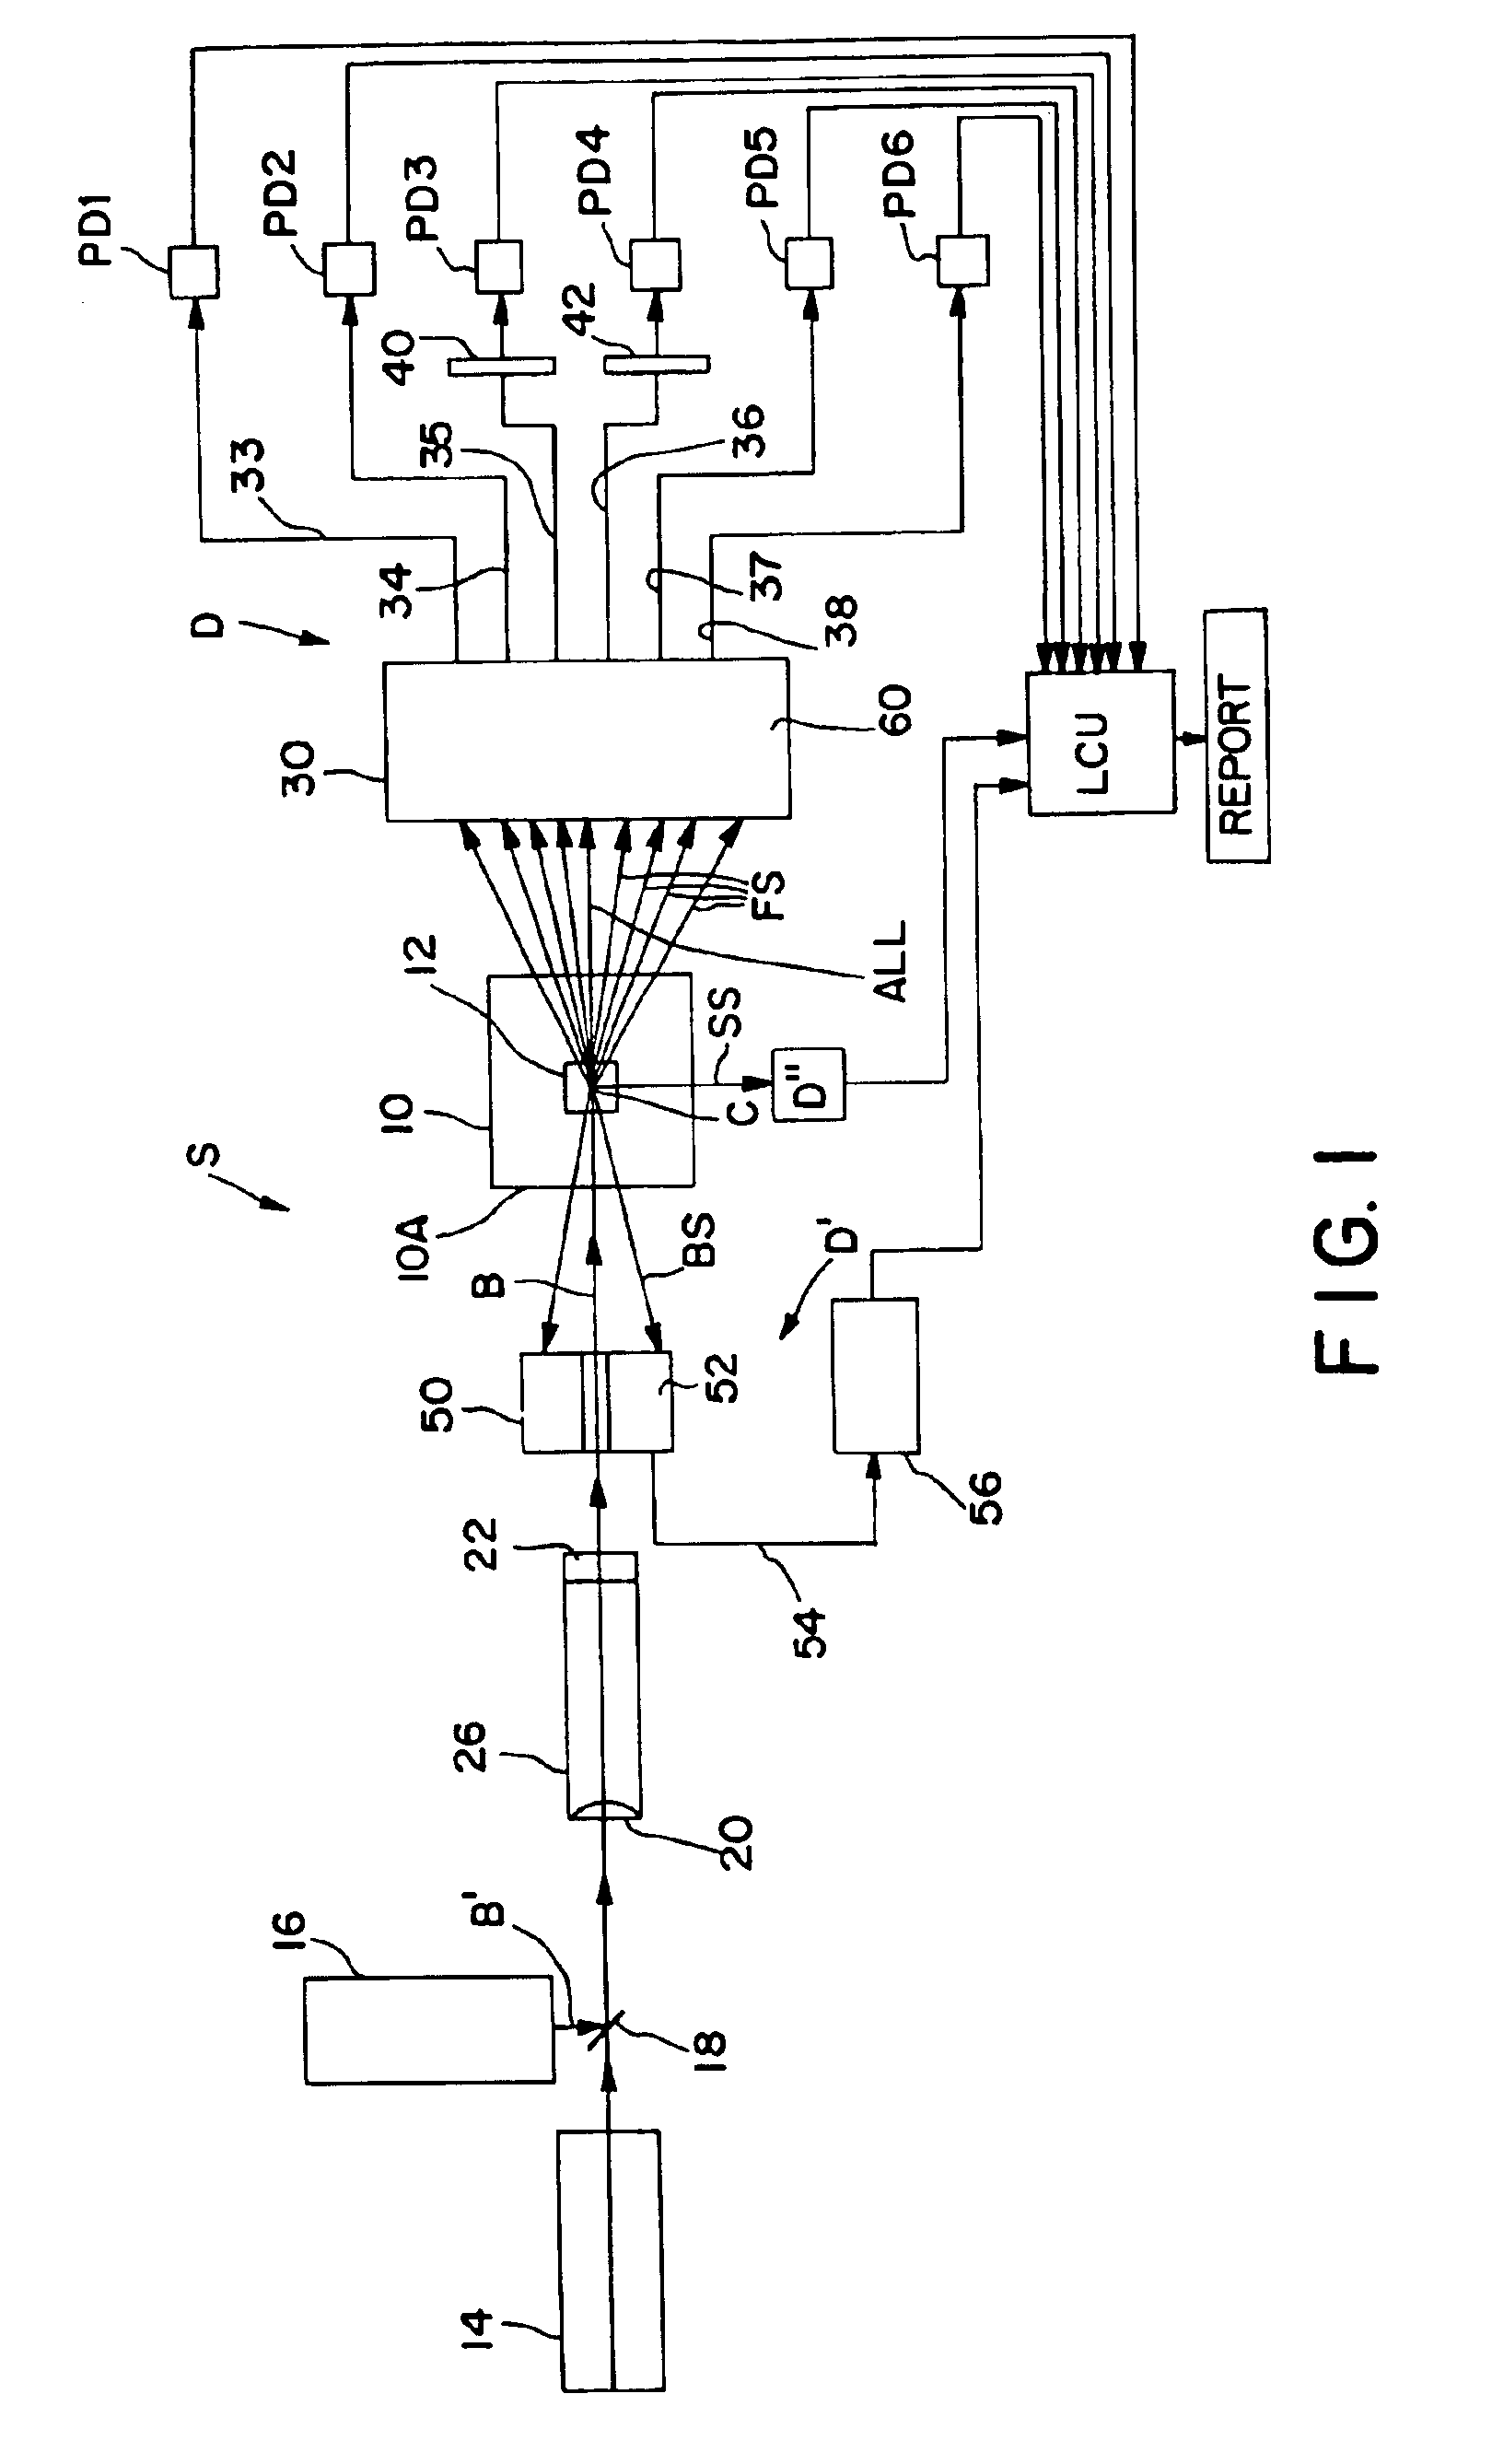 Apparatus for differentiating blood cells using back-scatter